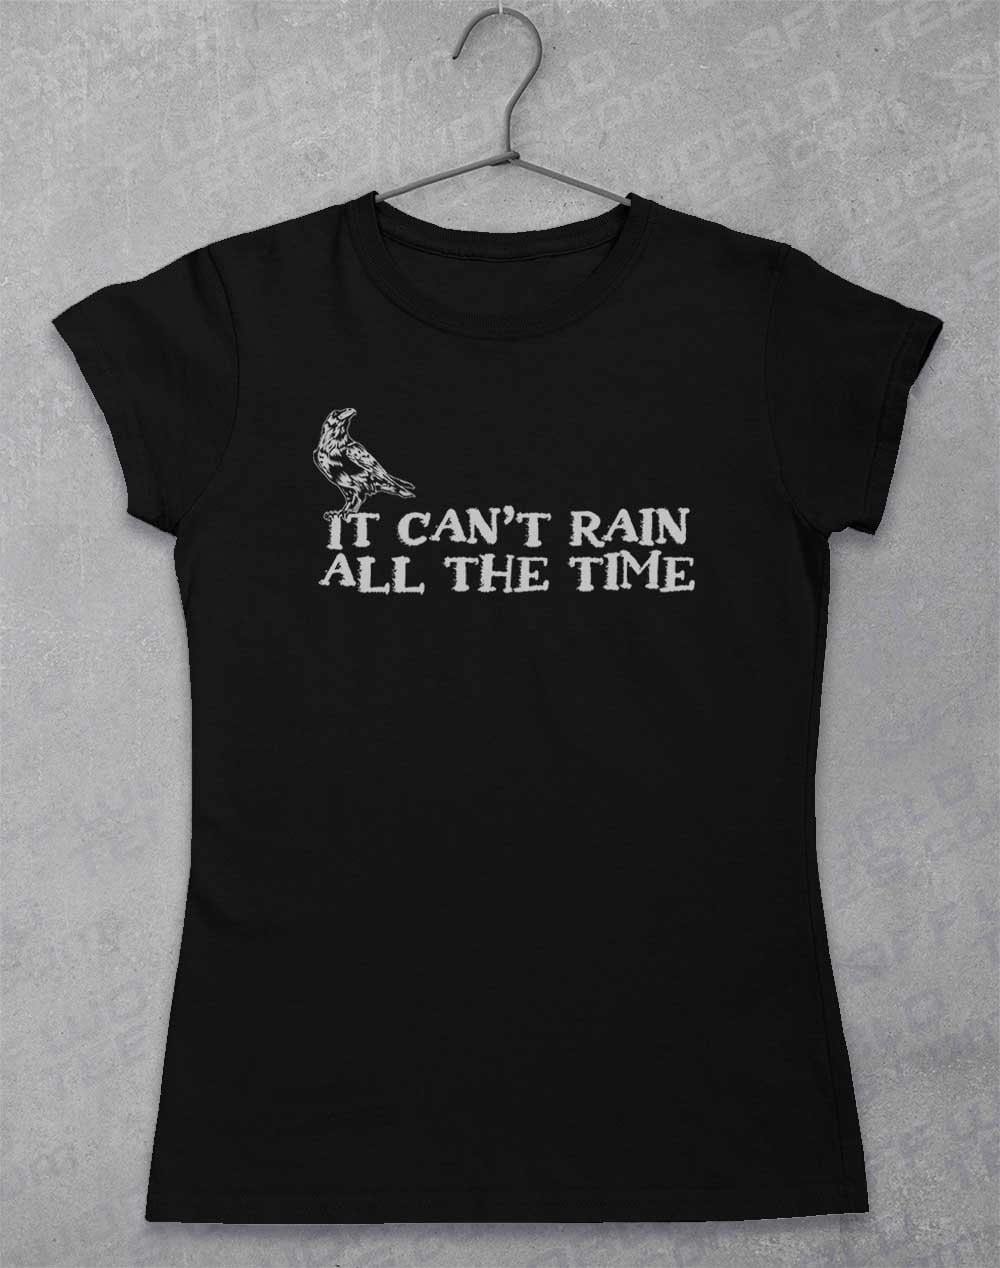 It Can't Rain All the Time Womens T-Shirt 8-10 / Black  - Off World Tees